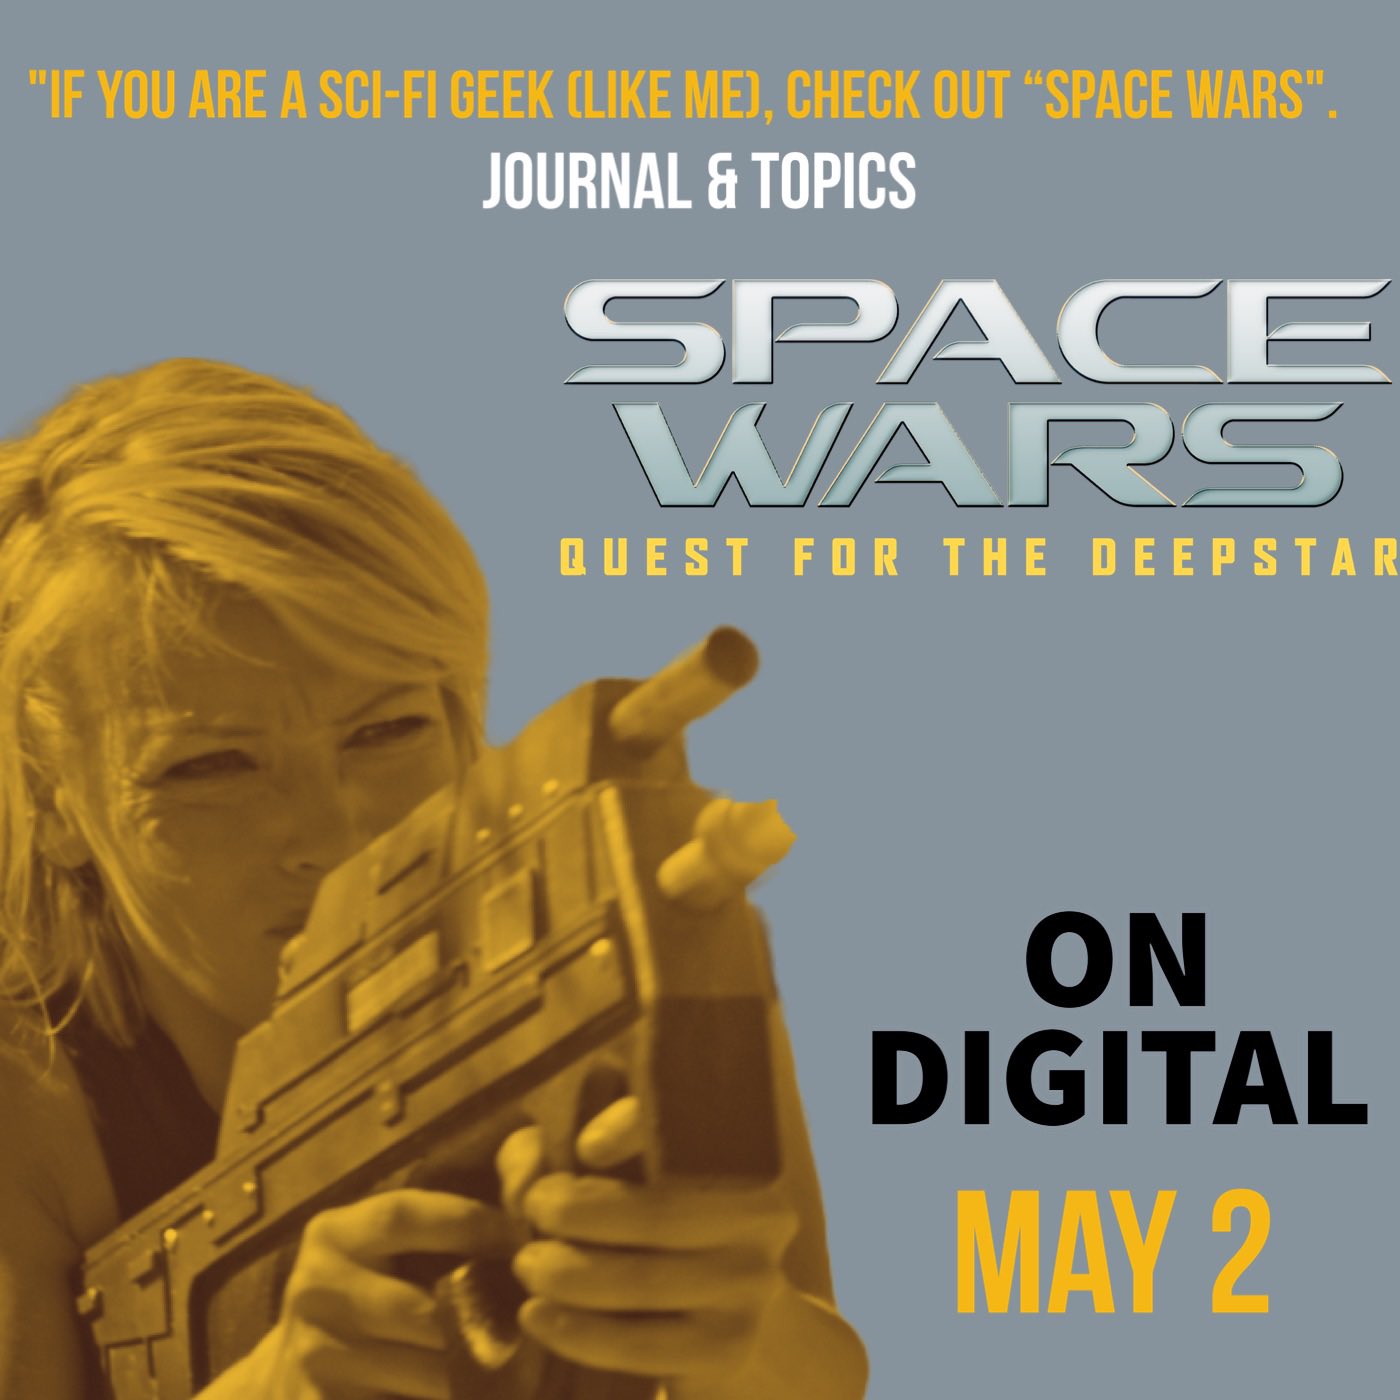 B-Movie Space Wars: The Quest for Deepstar Gets a New Trailer